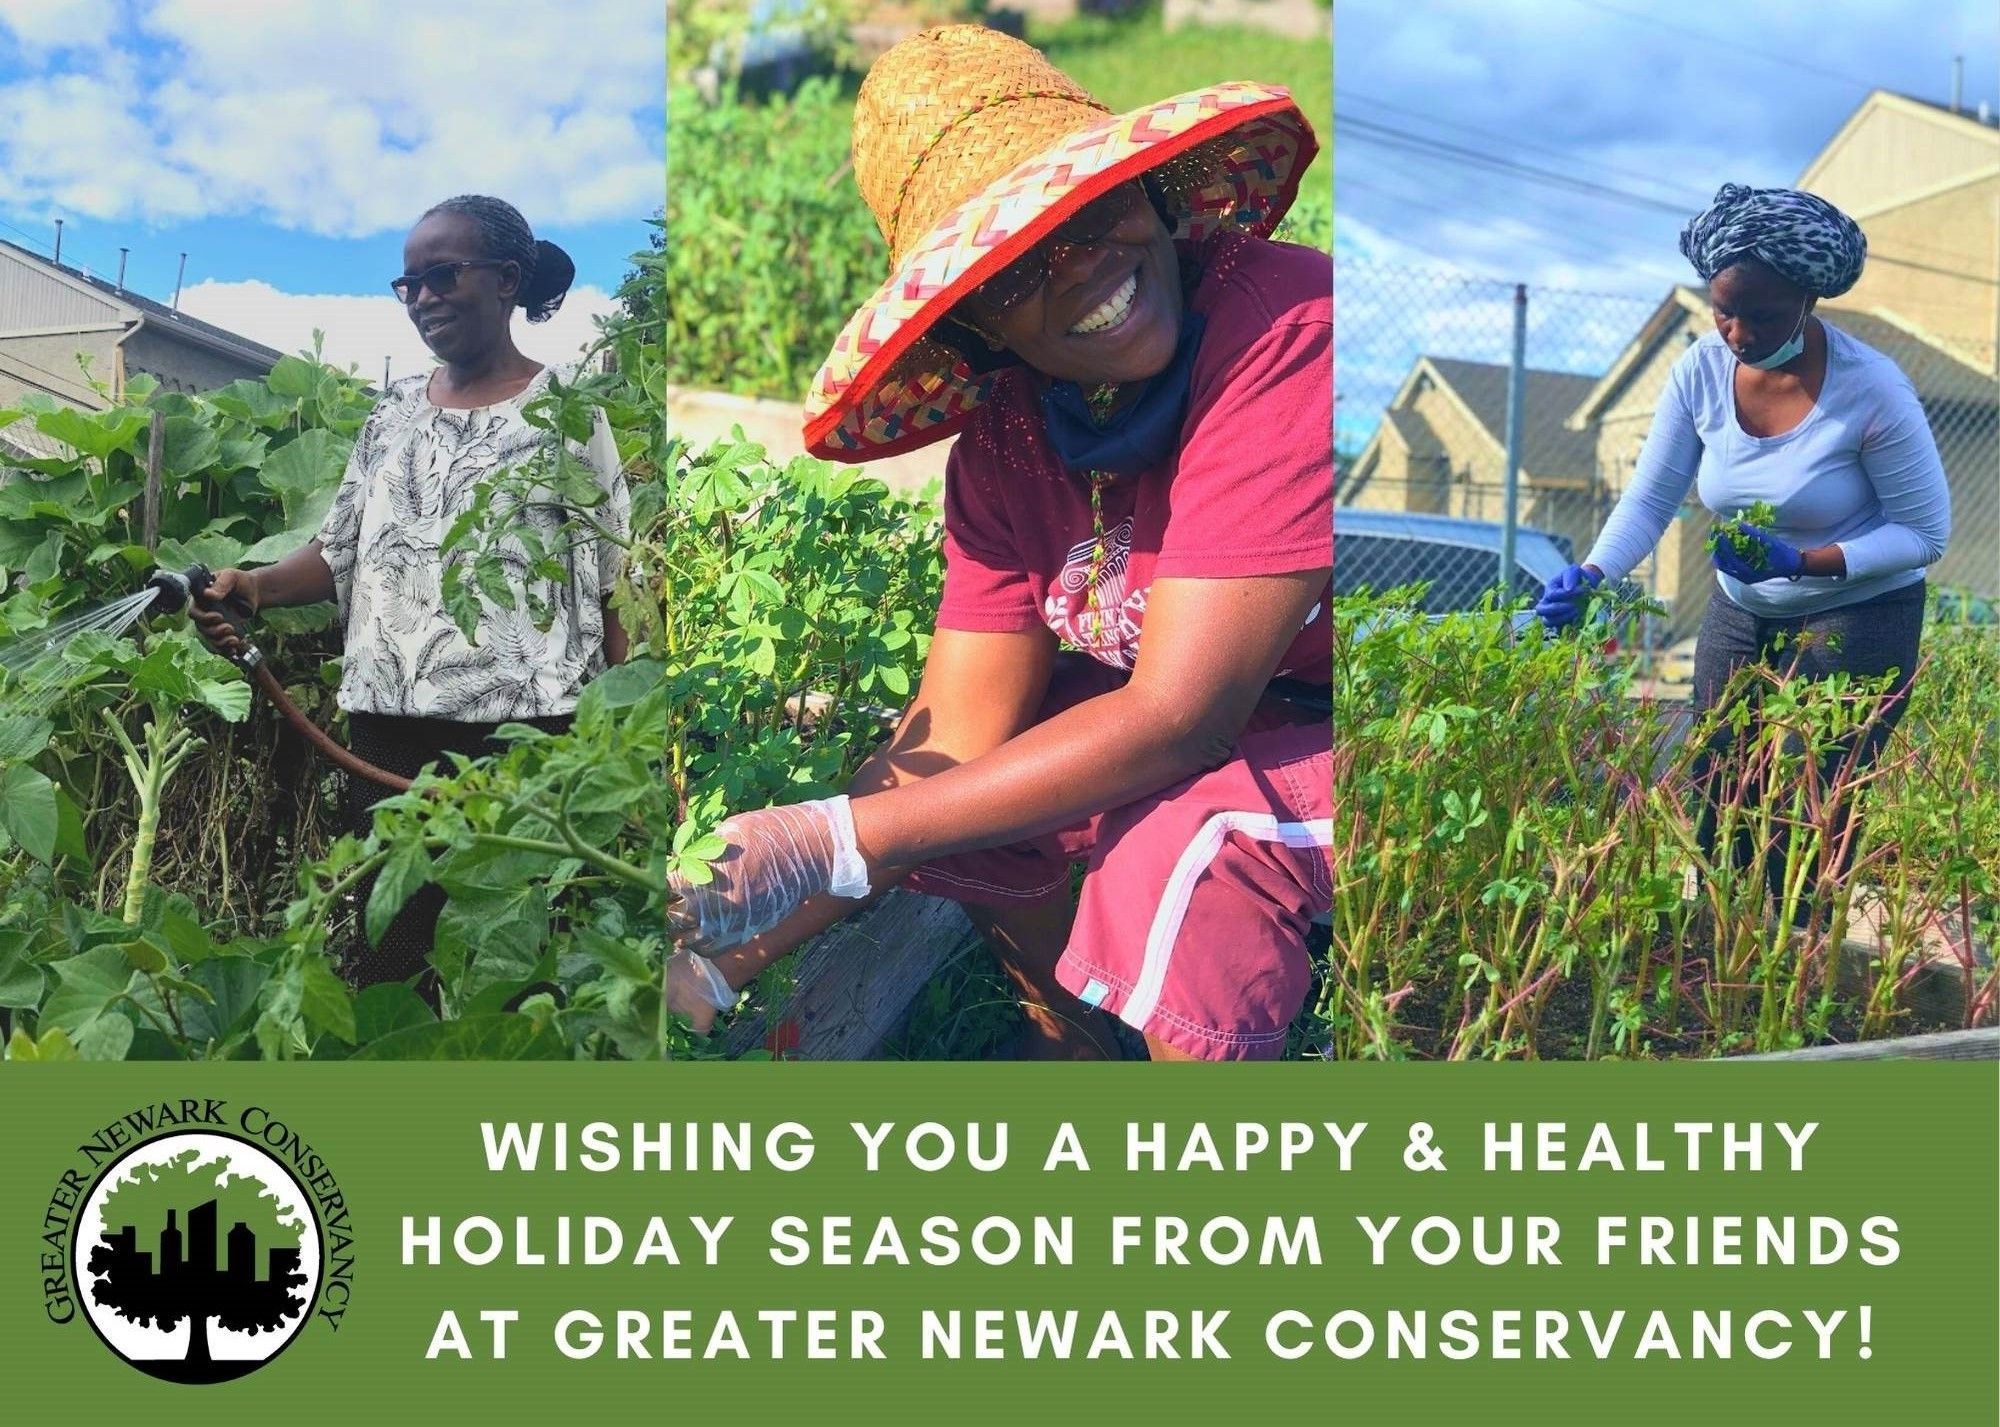 Happy Holidays from Greater Newark Conservancy!